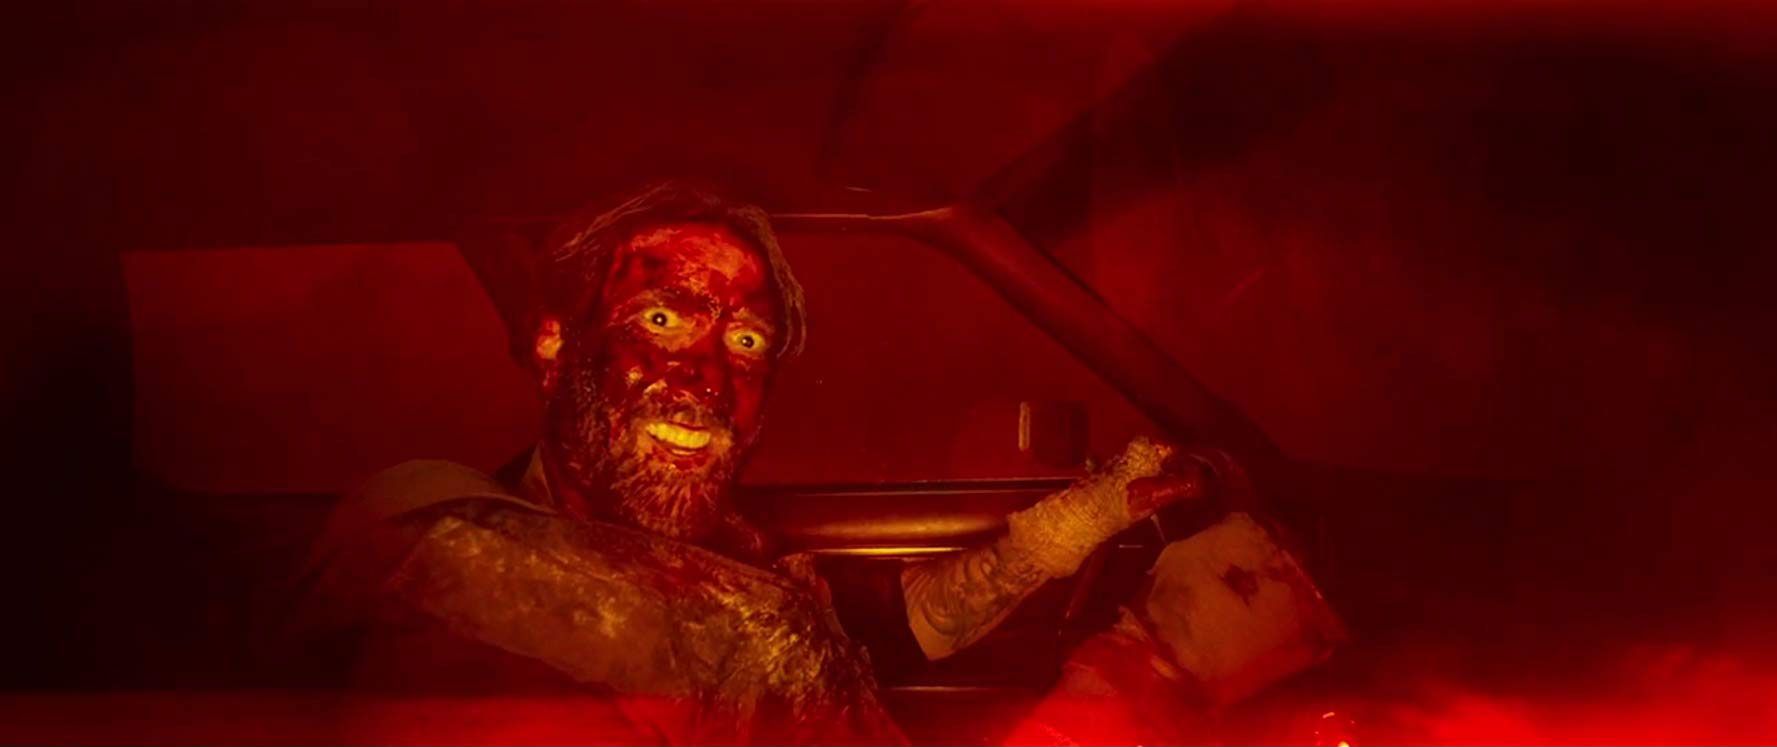 Nicolas Cage's Mandy explained - from the Black Skulls to The Chemist